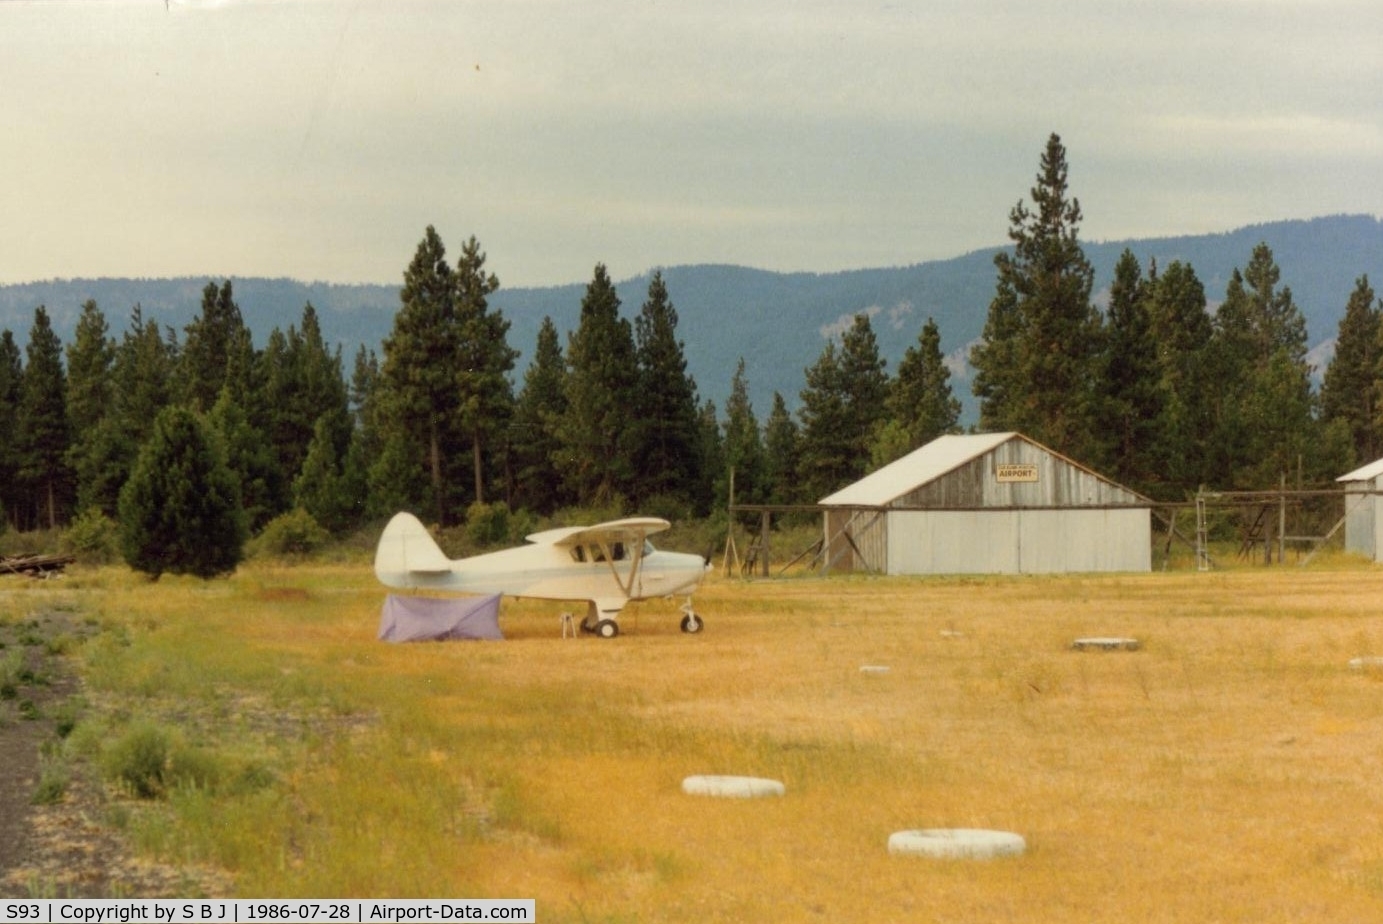 Cle Elum Municipal Airport (S93) - N5248Z at the Cle Elum airport in Wash in 1986.